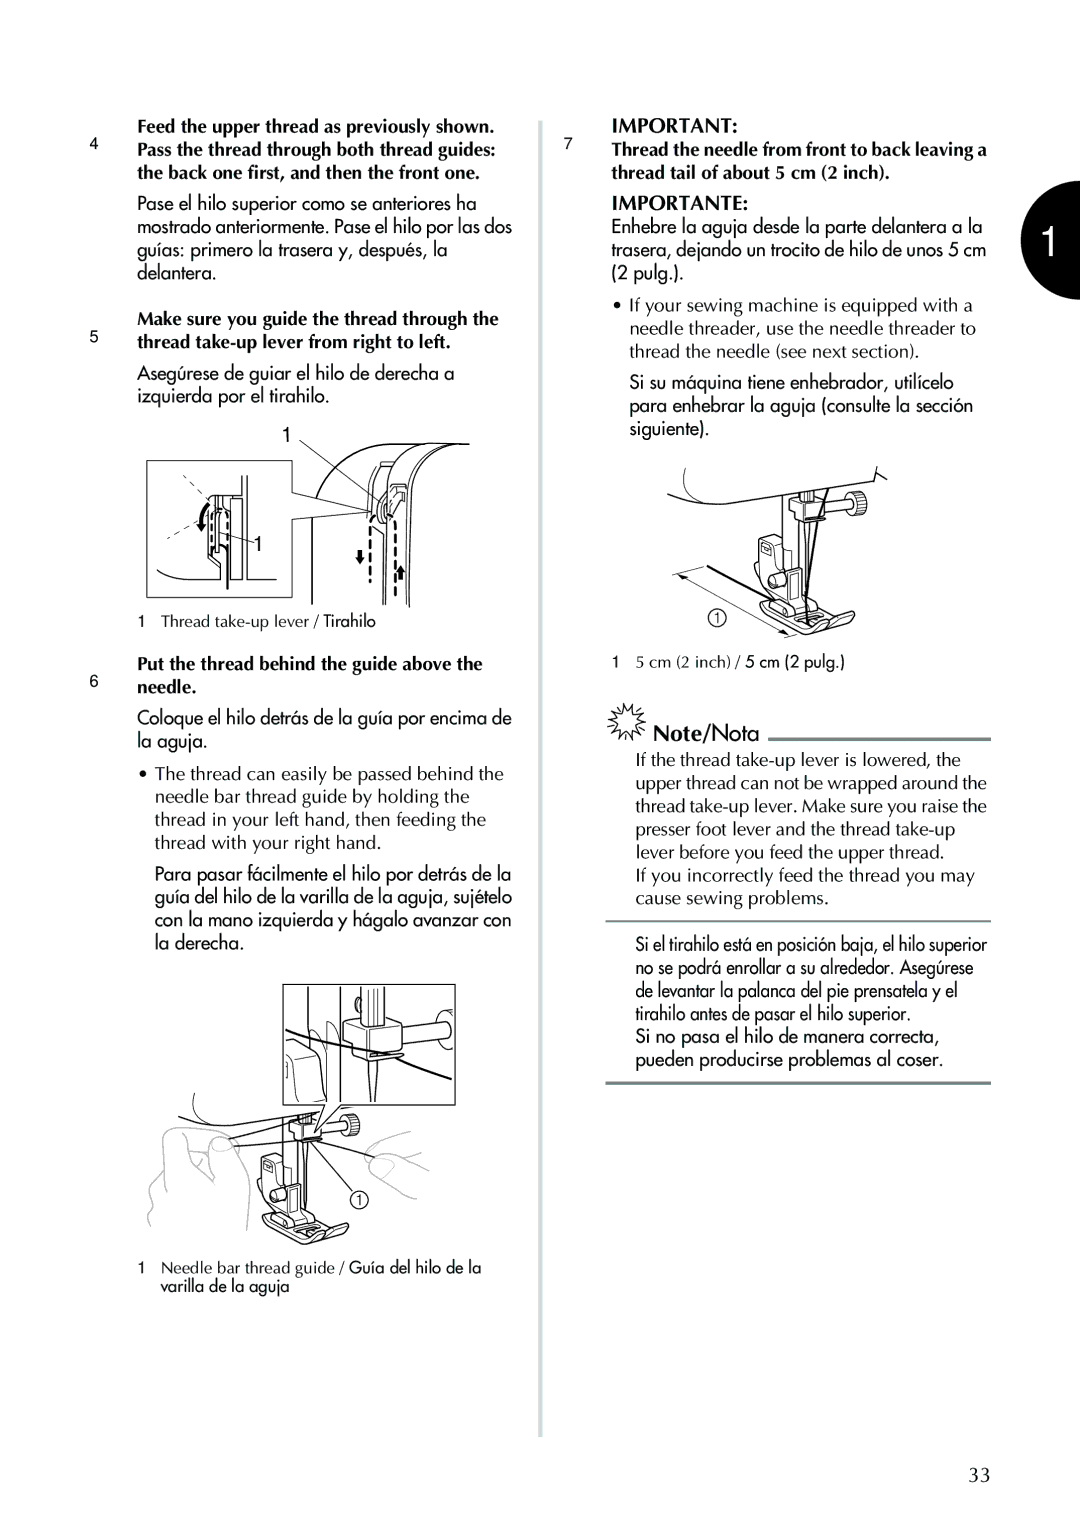 Brother XL-2600 operation manual 4Feed the upper thread as previously shown, Putneedle.the thread behind the guide above 